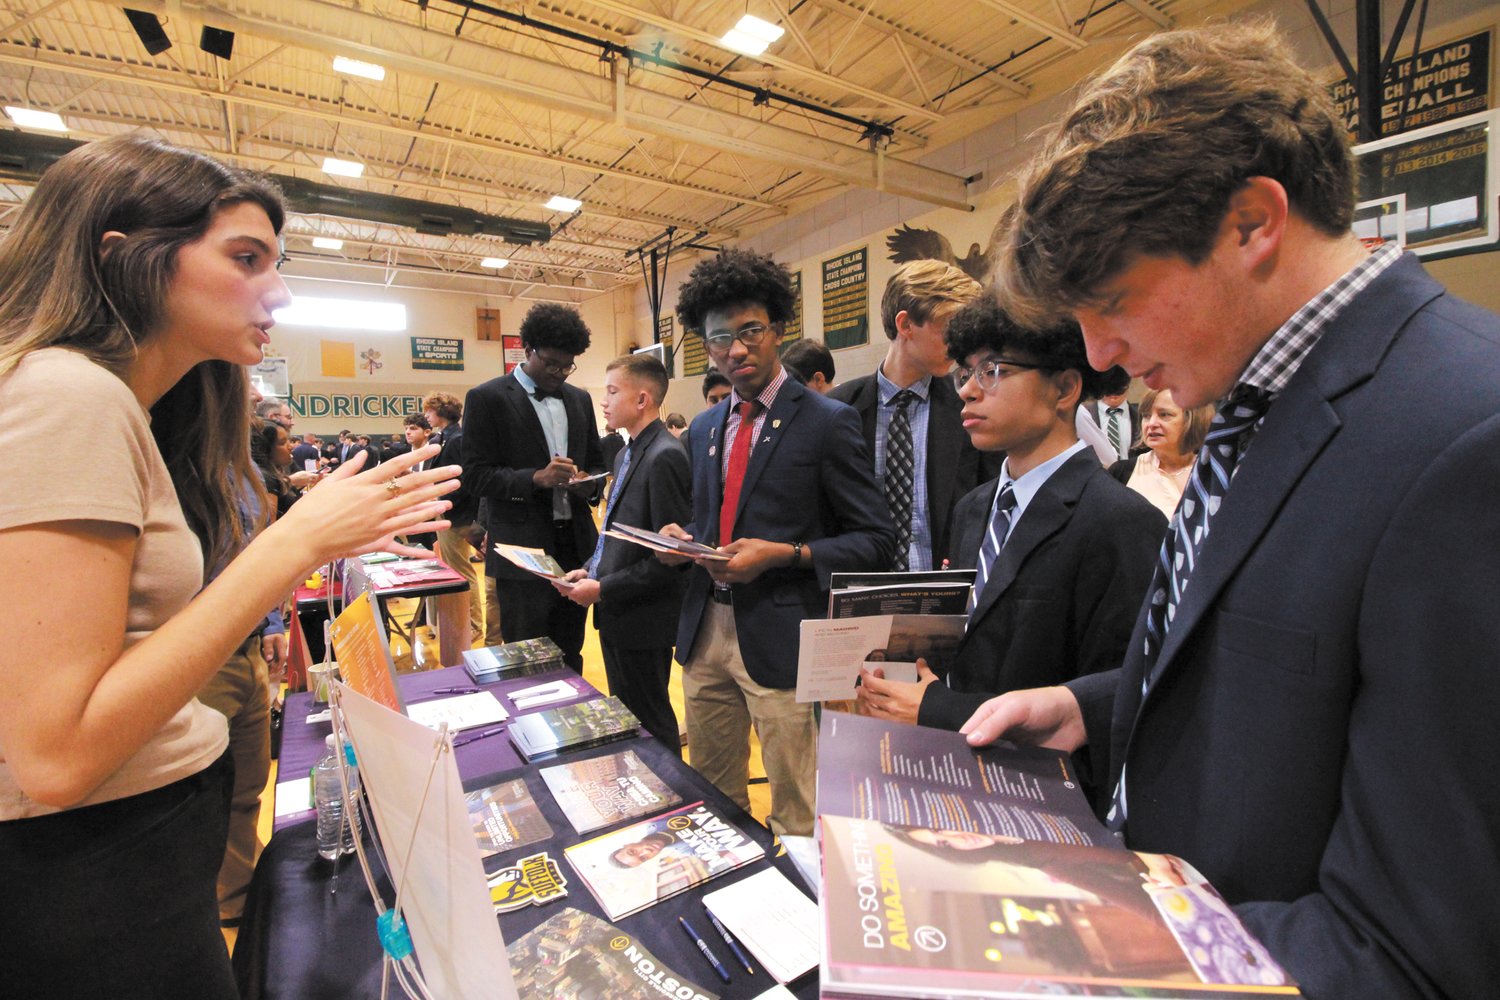 LOTS TO SAY: Students flip through brochures as they learn what Suffolk University has to offer at the college fair.